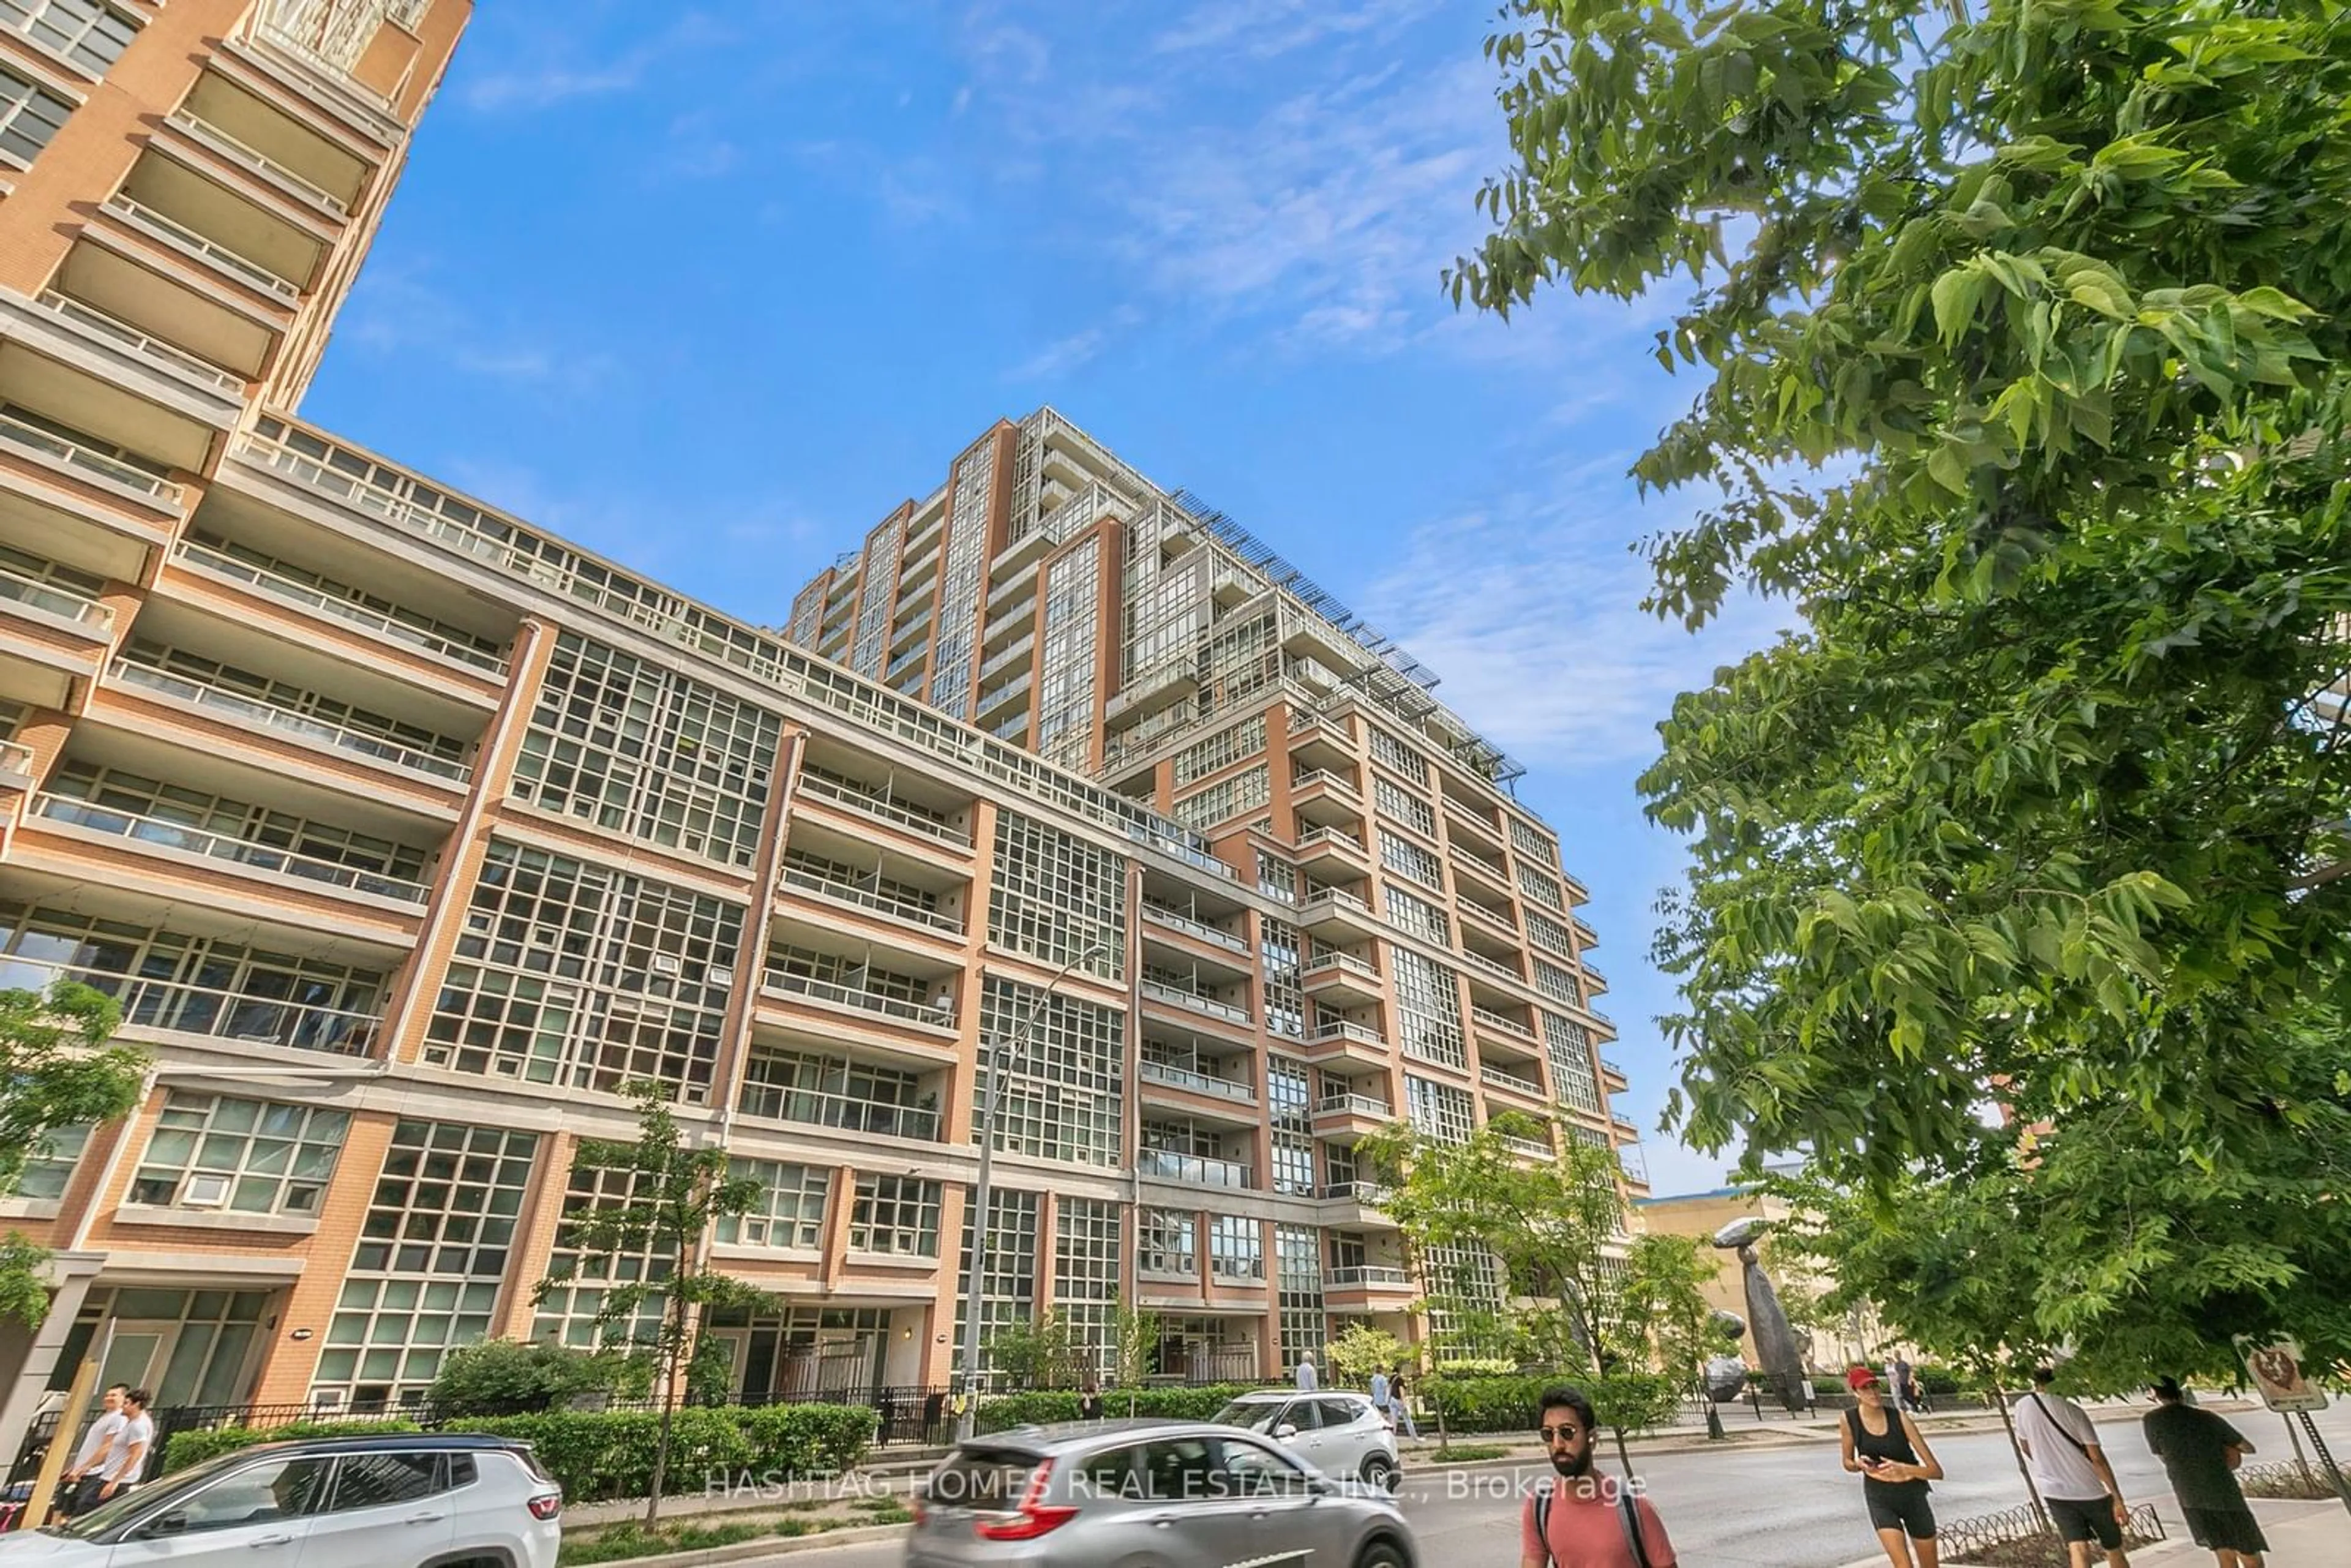 A pic from exterior of the house or condo for 85 East Liberty St #809, Toronto Ontario M6K 3R4